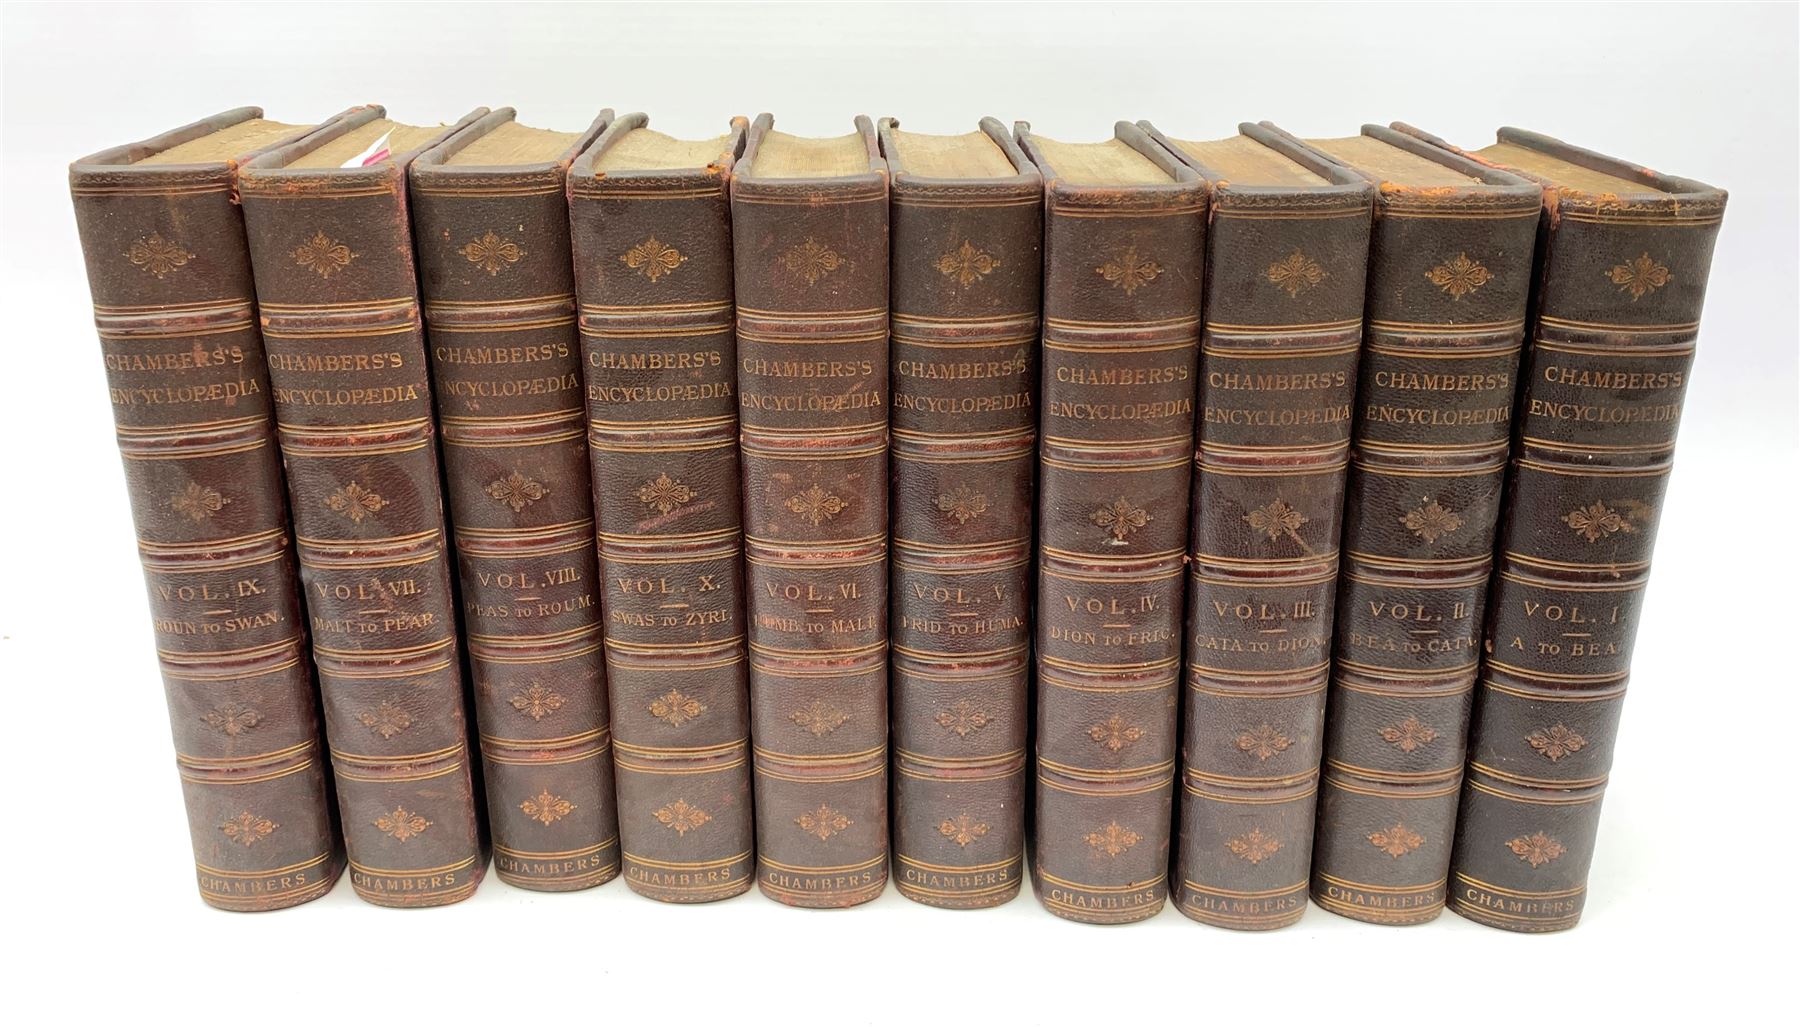 Chambers's Encyclopaedia.1901 New Edition. Ten volumes. Uniformly bound in half leather with marbled